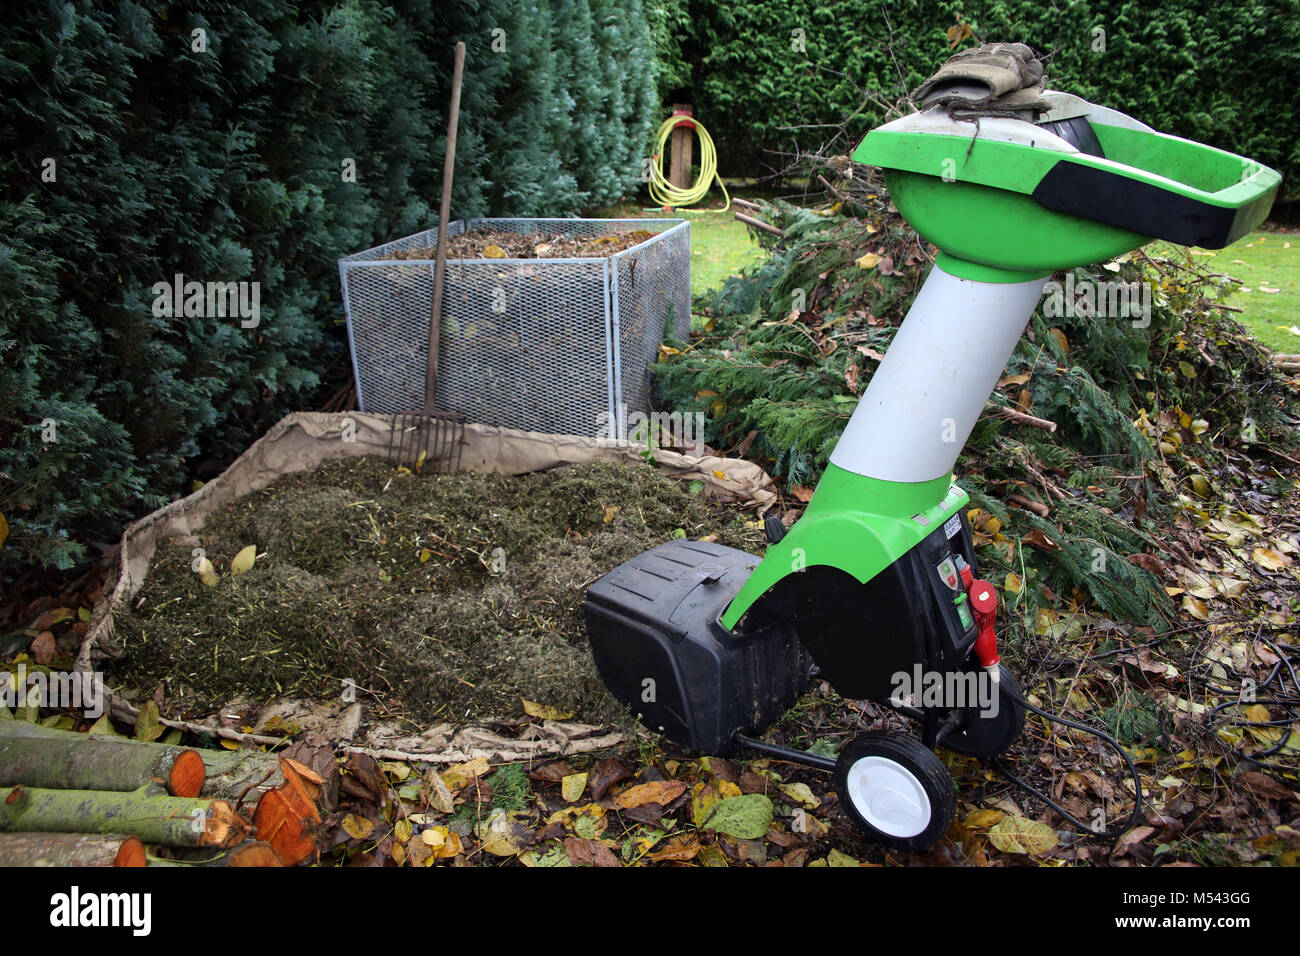 https://c8.alamy.com/comp/M543GG/autumn-workplace-in-the-garden-with-shredder-and-compost-M543GG.jpg